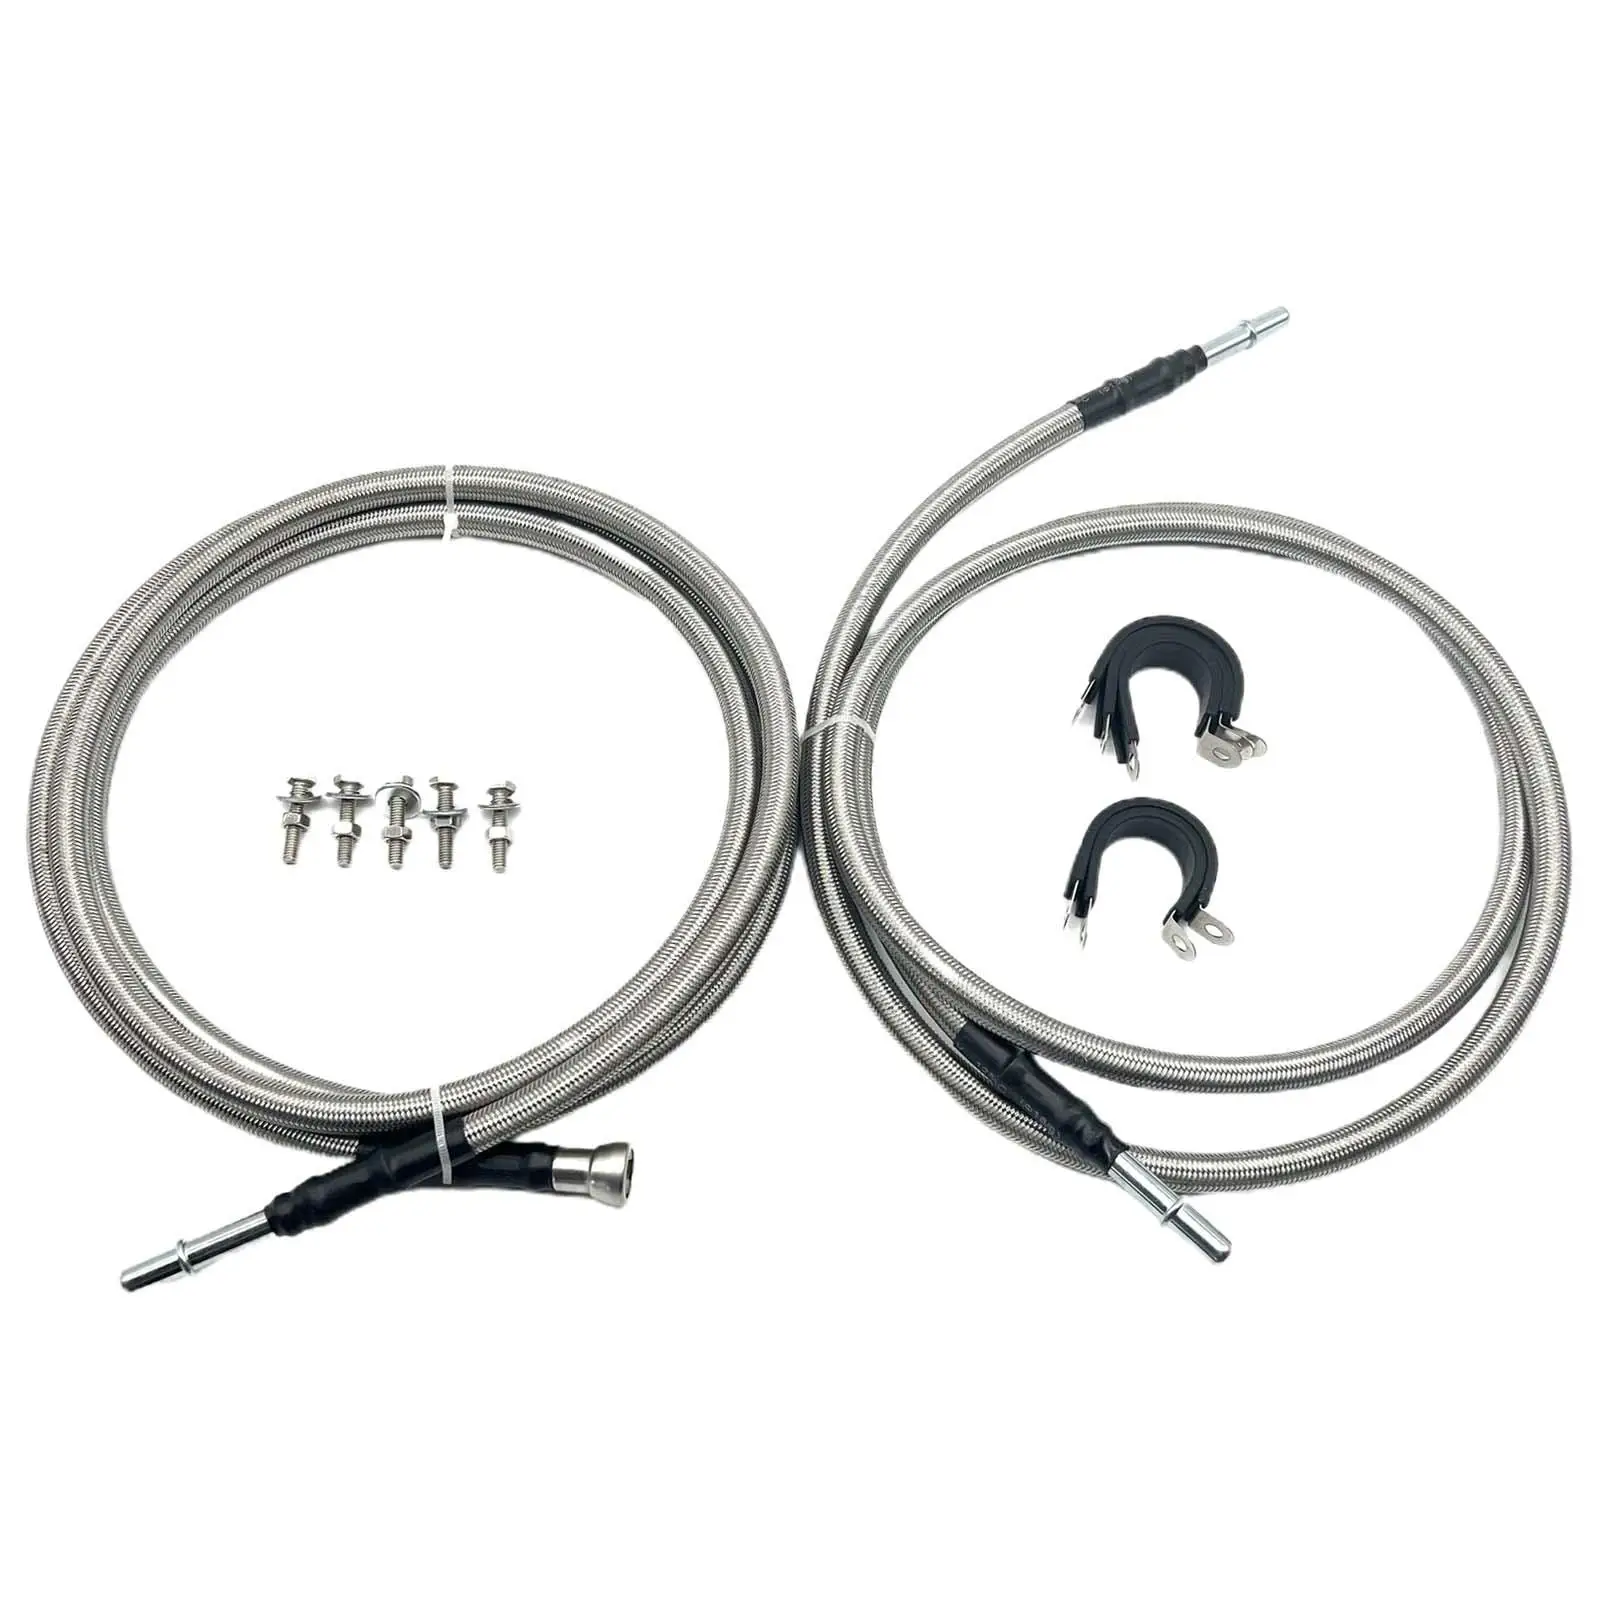 Fuel Line Quick Fix Set Repair Parts Durable Assembly Accessory Professional Direct Replaces for Chevy Silverado 2004-2010